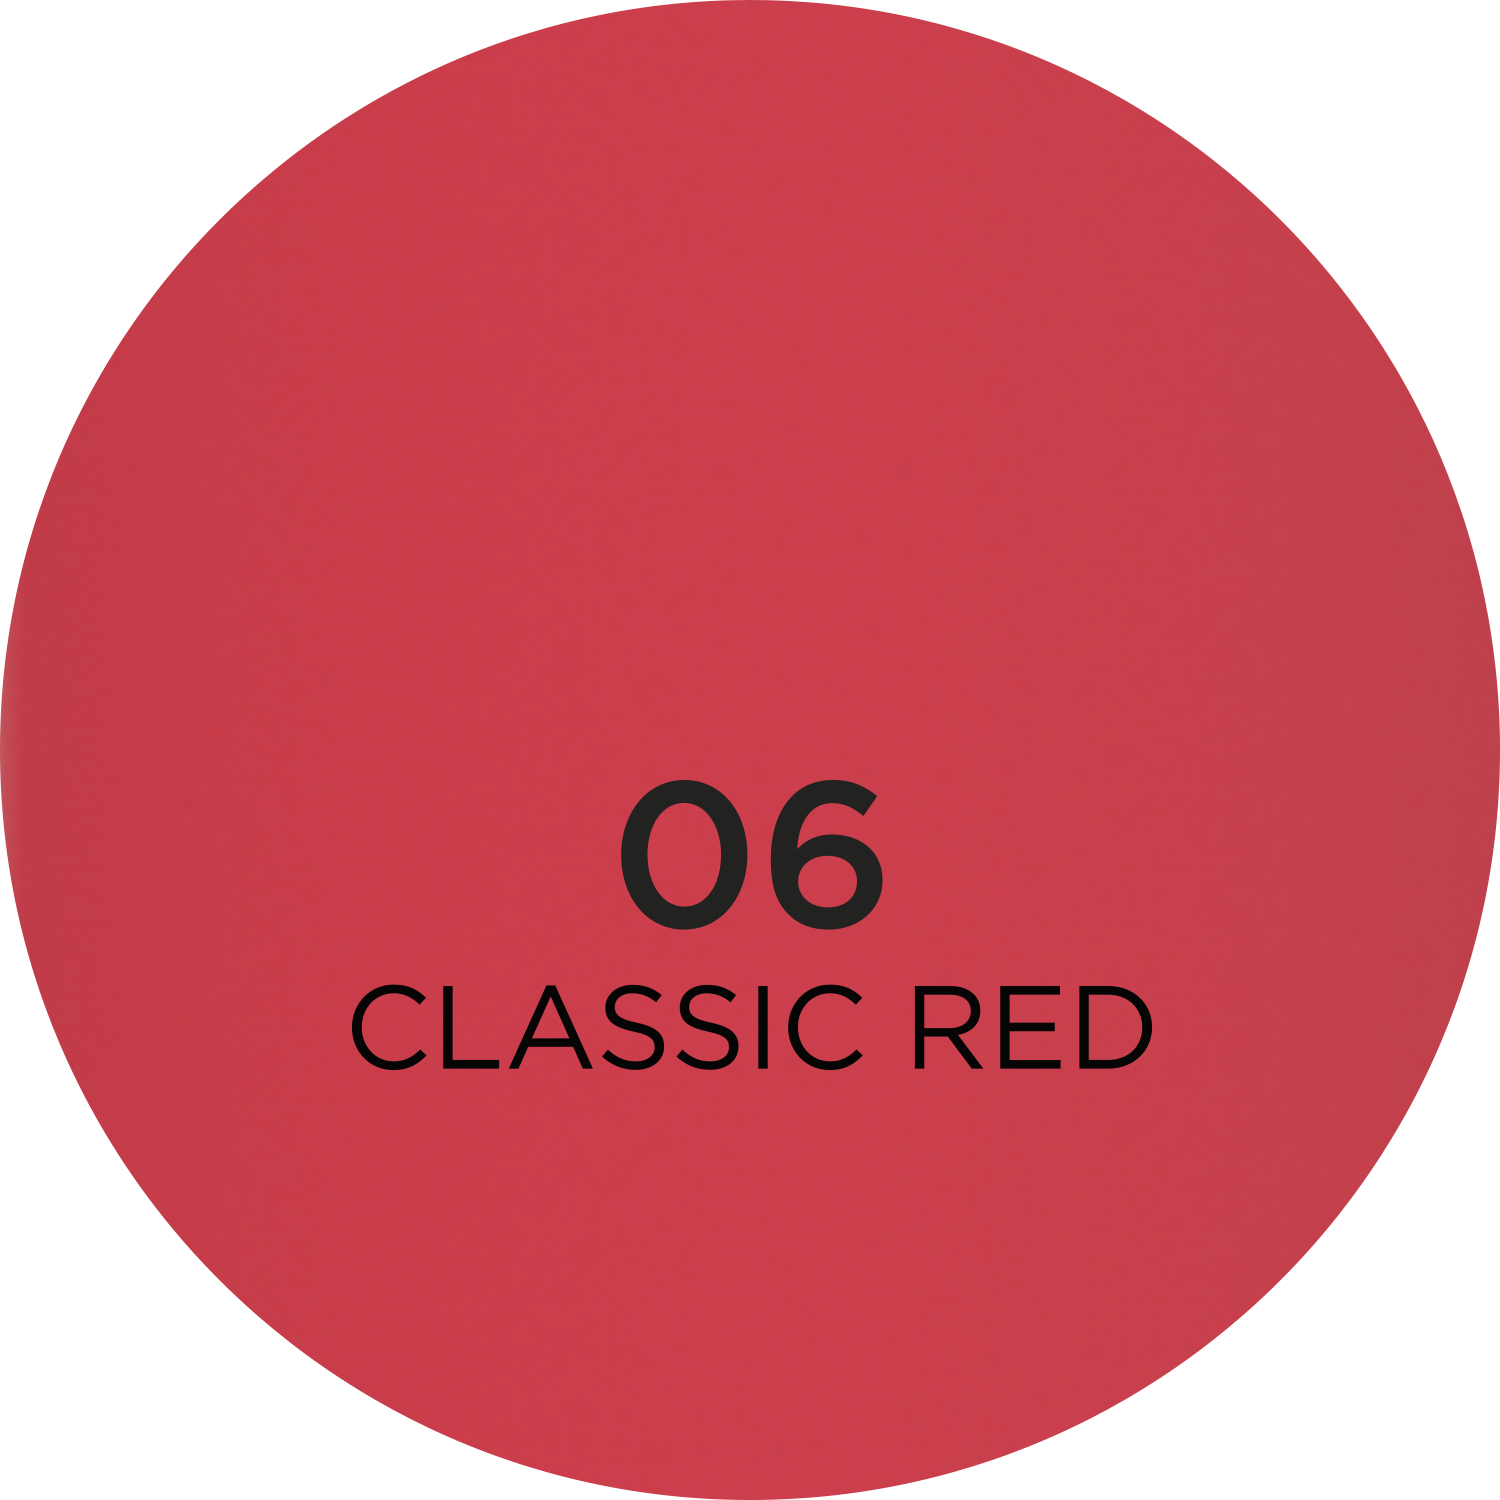 06 Classic red